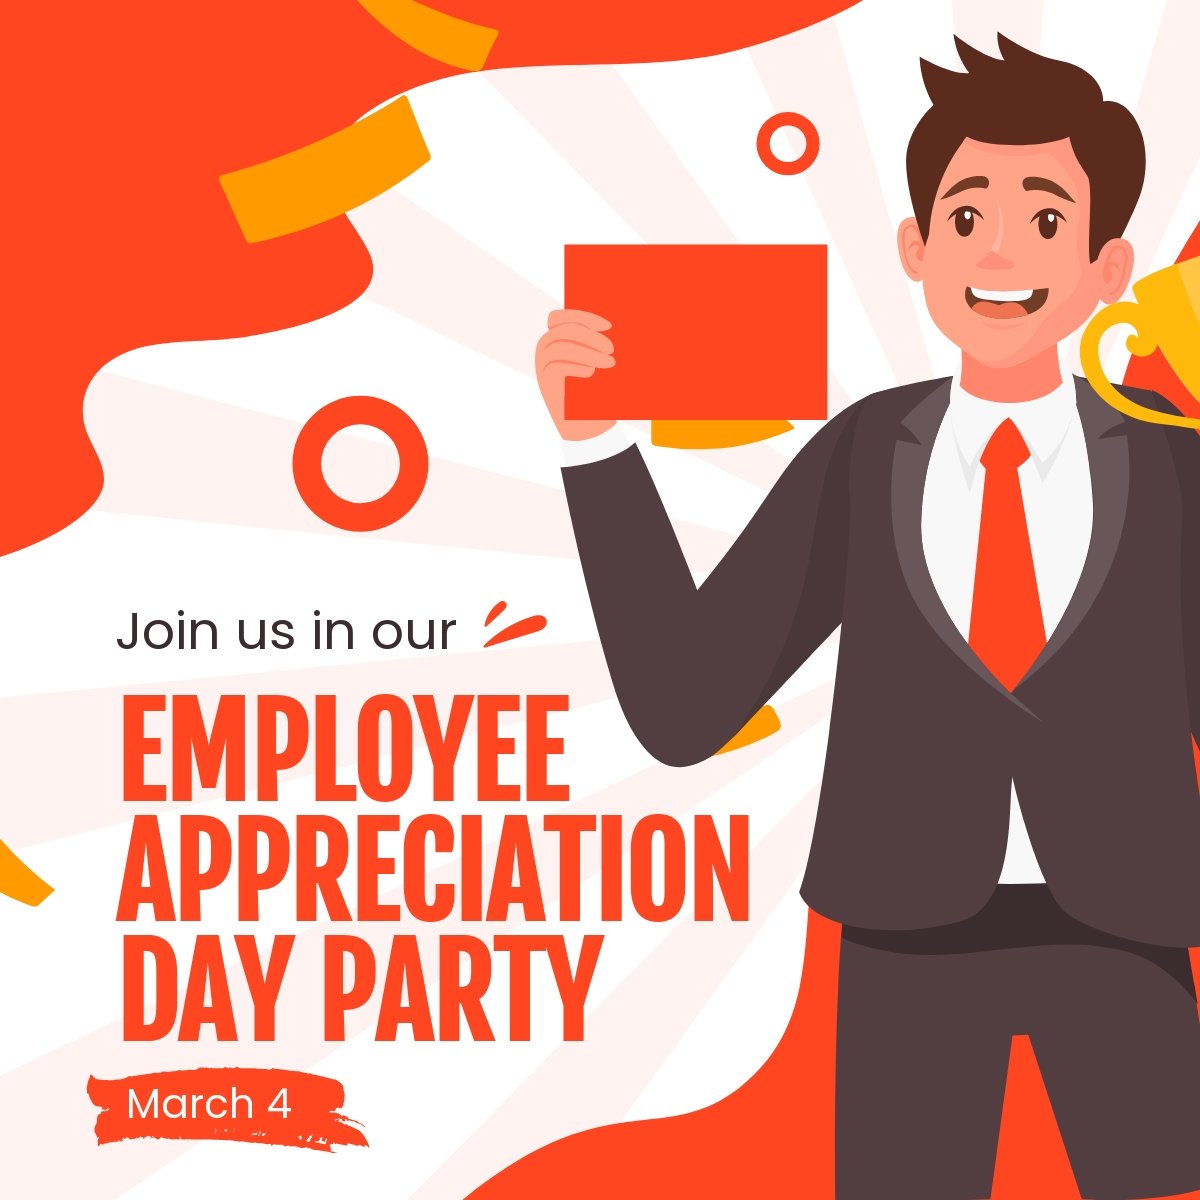 Employee Appreciation Day Party LinkedIn Post Template